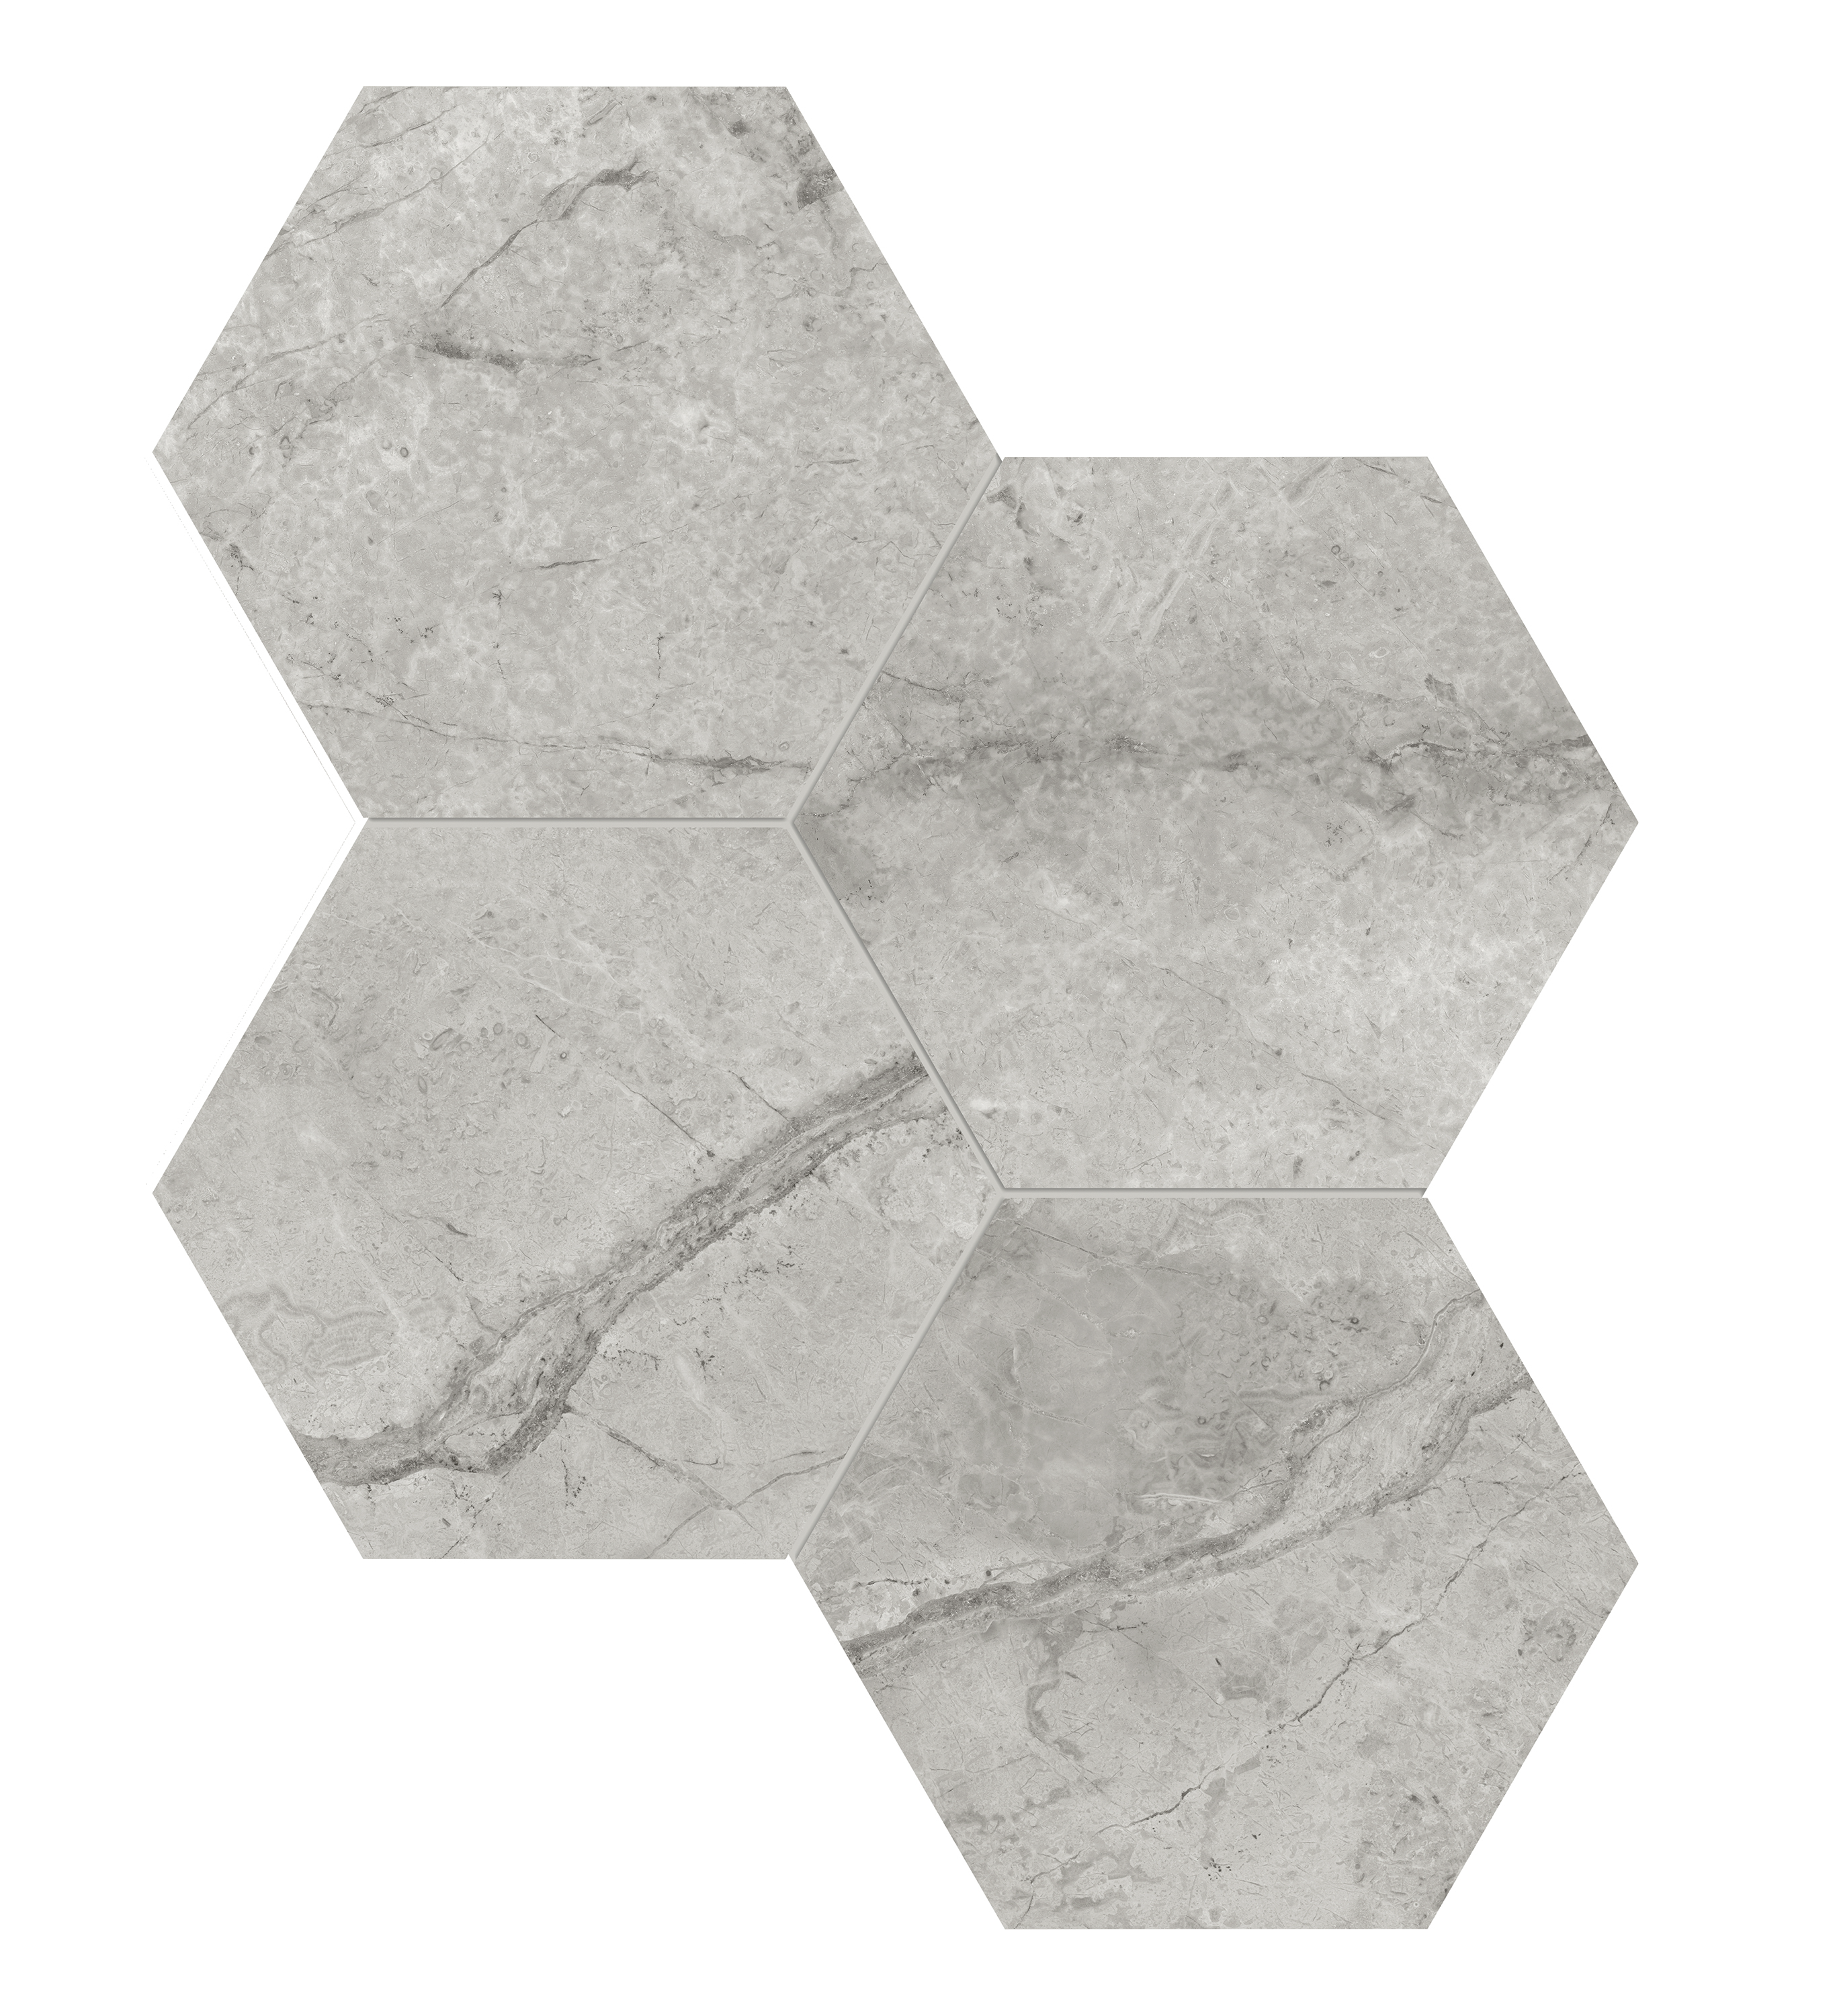 paradiso argento hexagon 6-inch pattern glazed porcelain mosaic from la marca anatolia collection distributed by surface group international honed finish straight edge edge mesh shape